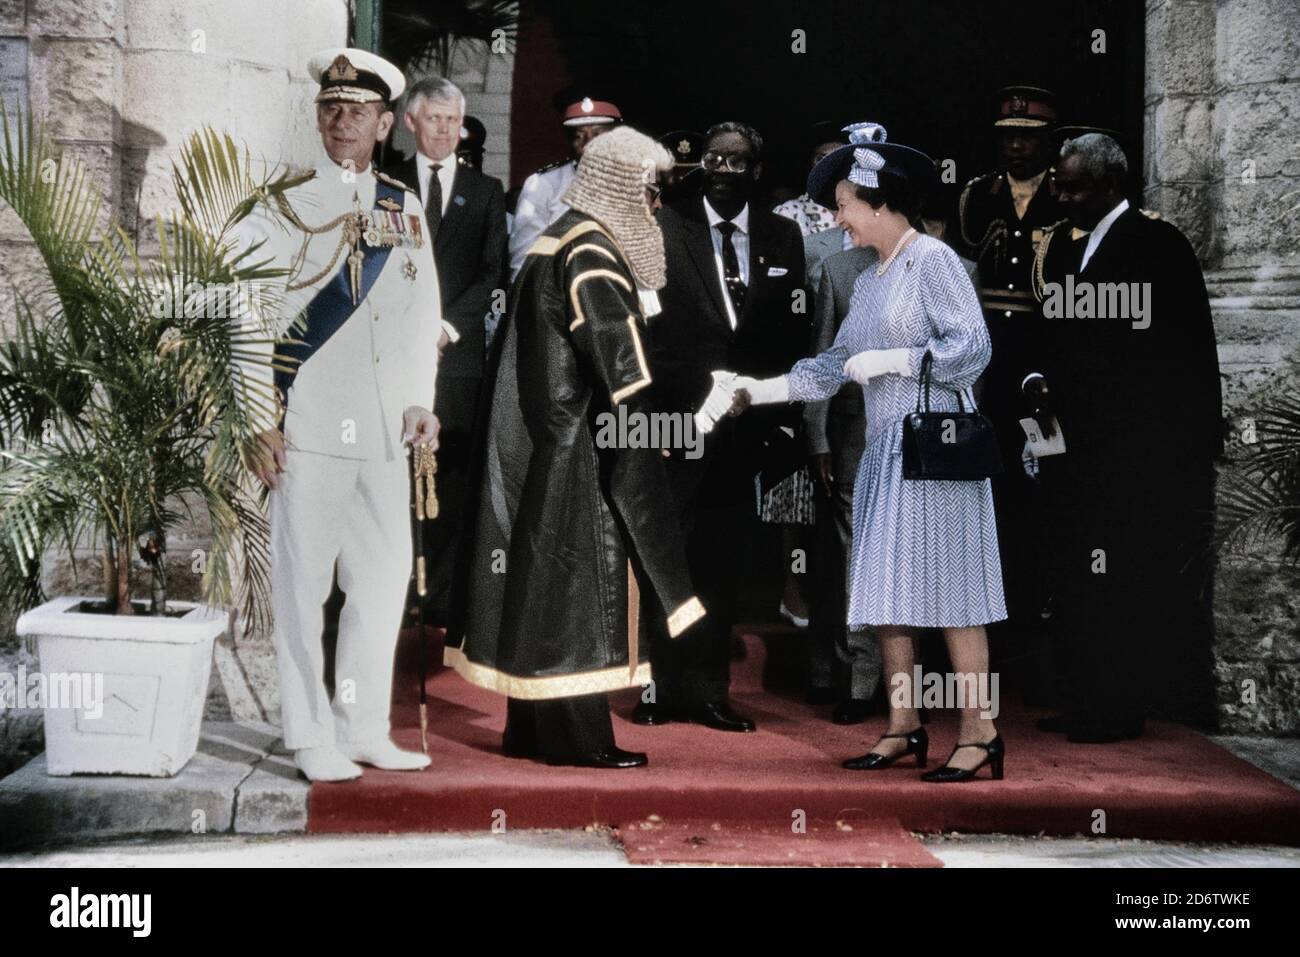 Britain's Queen Elizabeth II shaking hands with Speaker of the House of Assembly Lawson Weekes, at the Barbados Parliament on Thursday, March 9, 1989, as she departs following ceremonies for the 350th anniversary of the Caribbean Island's parliament. Prince Philip at left and Barbados Prime Minister Erskine Sandiford at rear Stock Photo